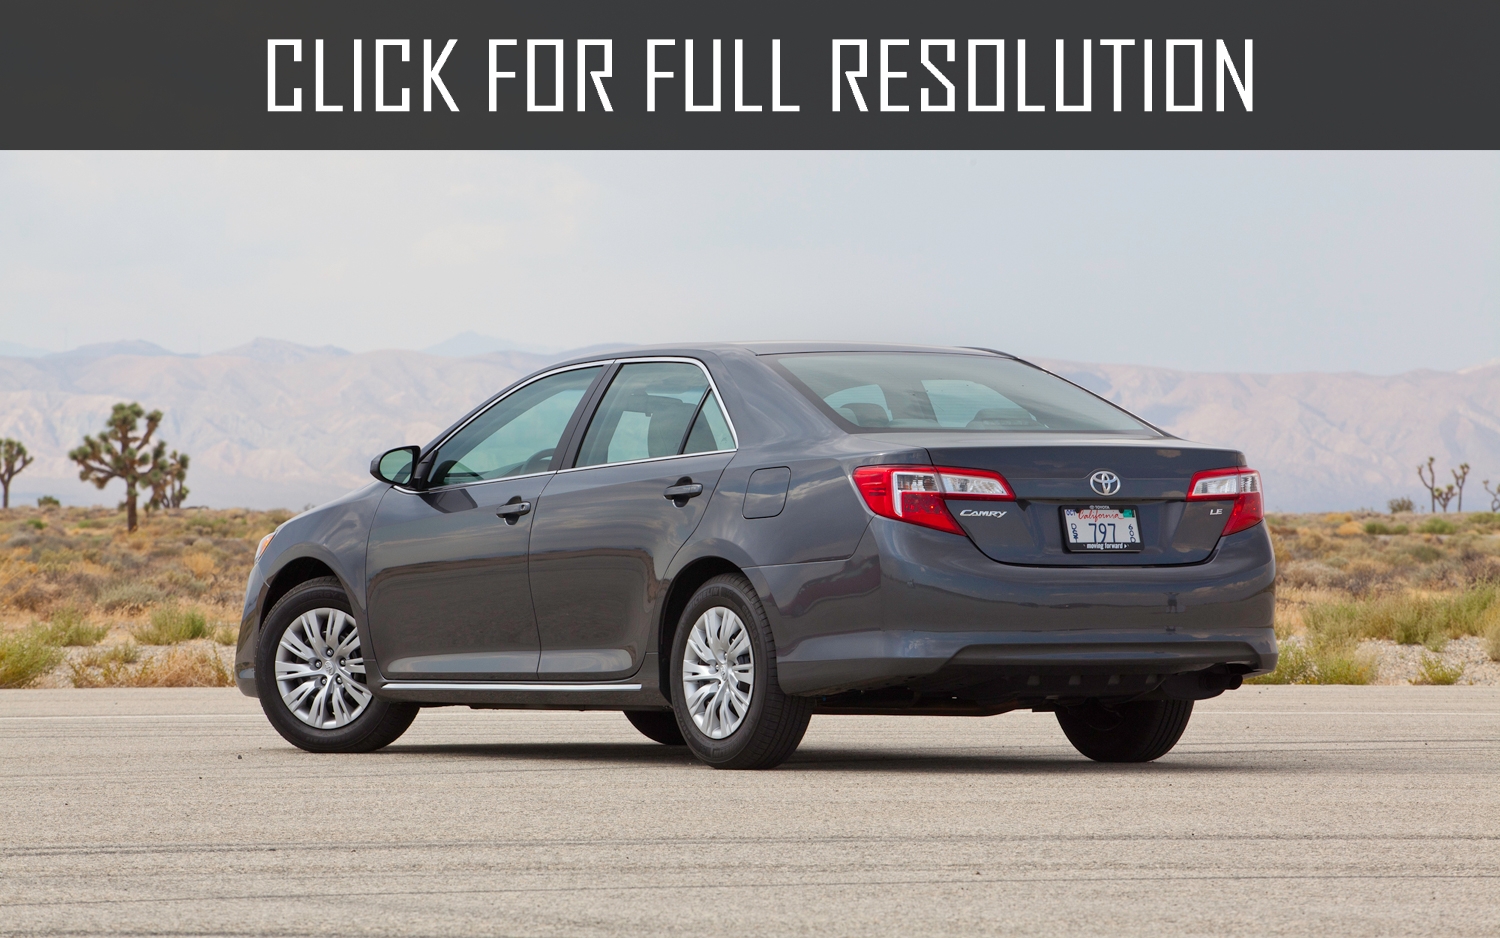 2012 Toyota Camry Le Best Image Gallery 4 17 Share And